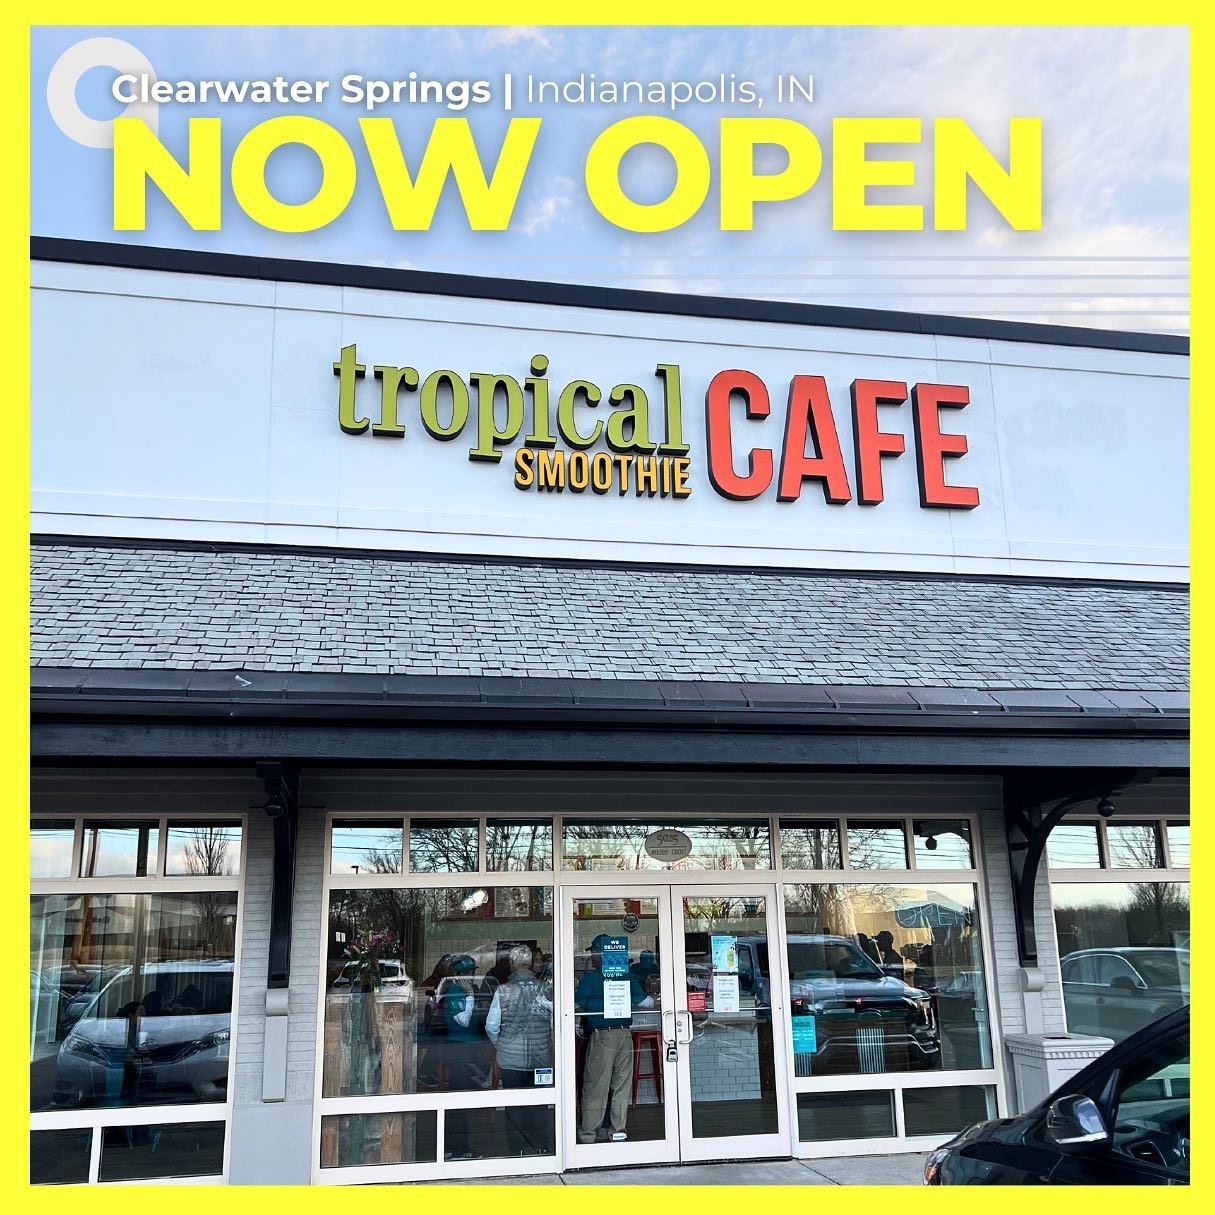 Congratulations to Heather and Linda on their first Tropical Smoothie Caf&eacute;. Our job as brokers often takes a lot of patience and persistence, especially in high demand markets. We worked for 3 years to find the perfect location, secure a lease